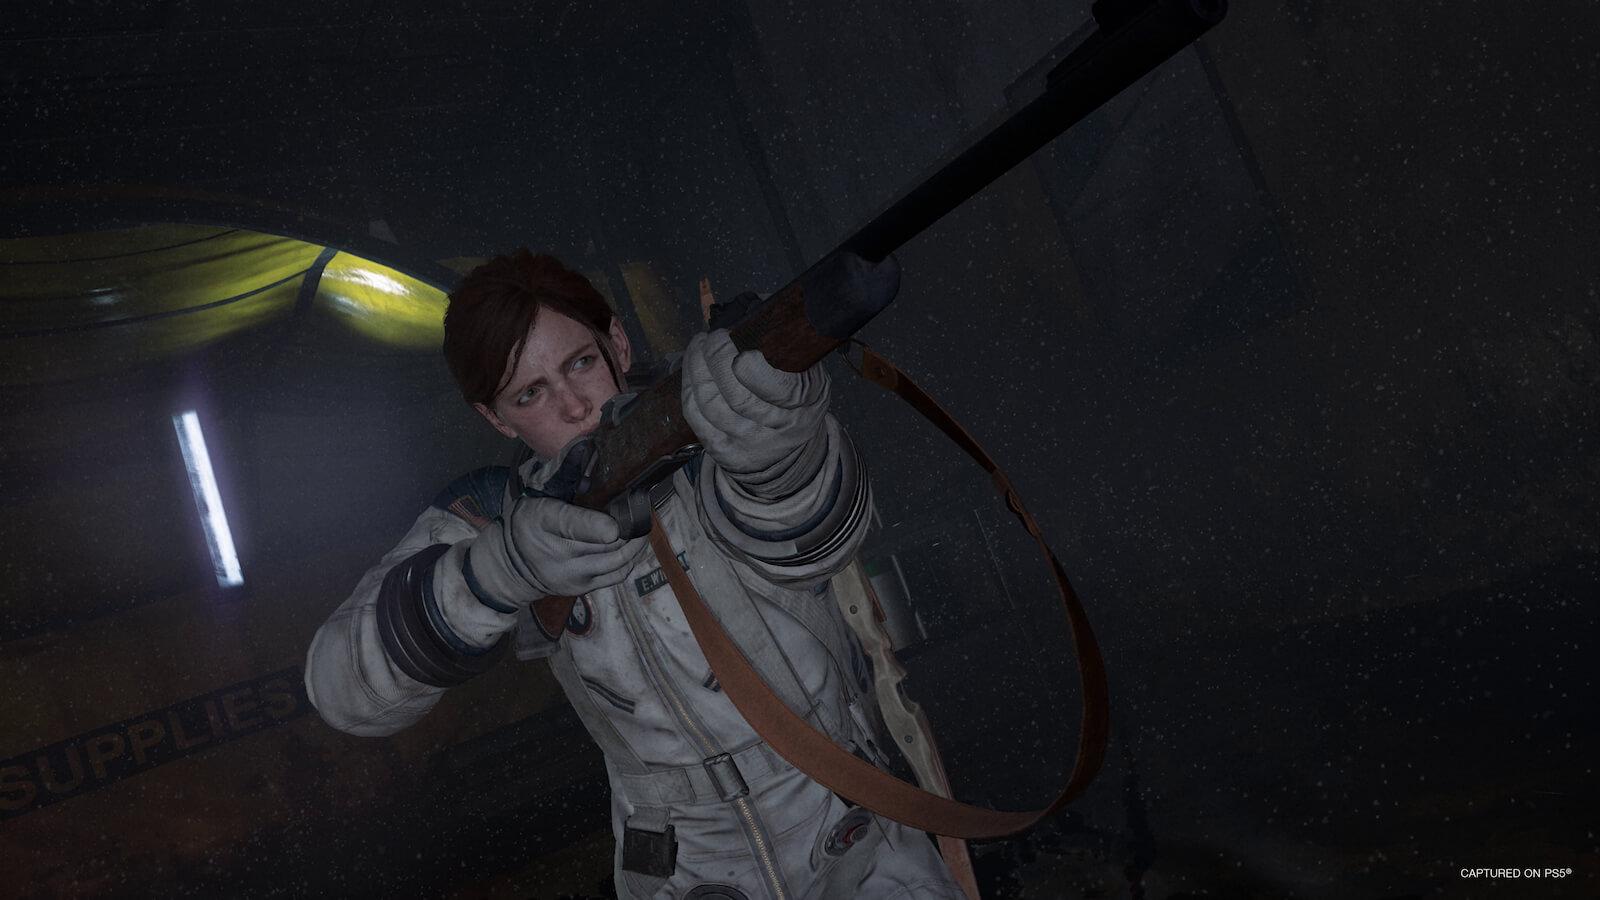 Destiny 2 skin for Ellie in TLOU2 leaked but fans point out the irony